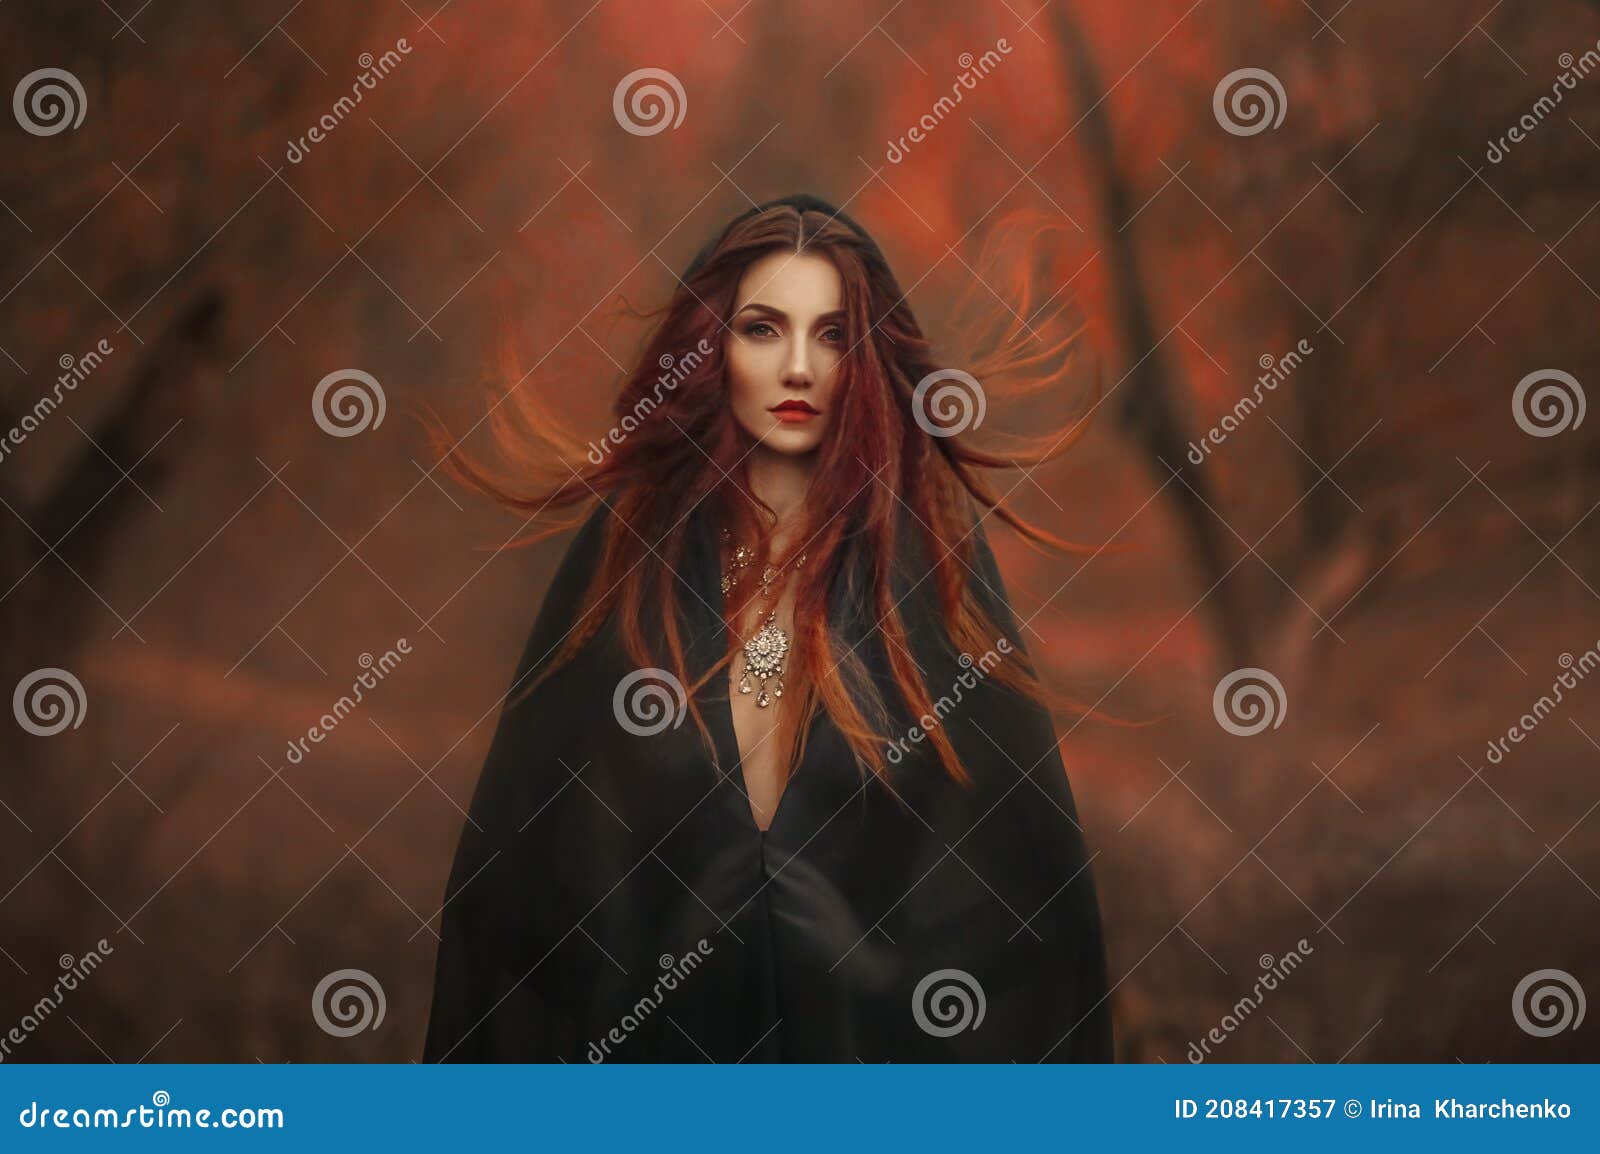 fantasy gothic woman dark witch. red-haired evil girl demon in black dress cape hood. long hair flutters fly in wind